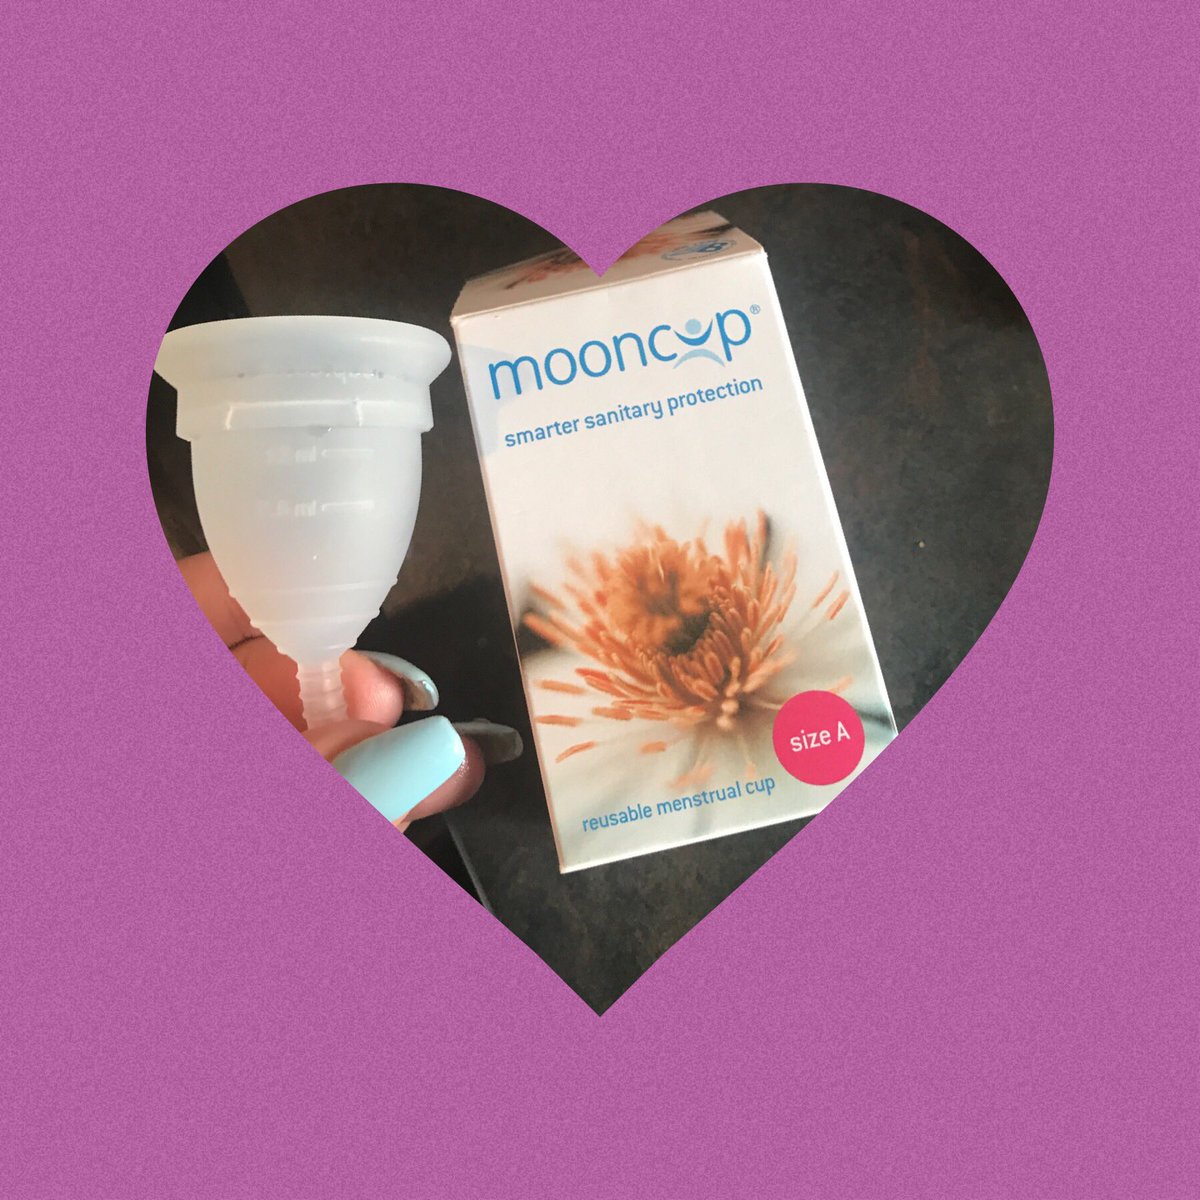 Genuinely plain sailing. It takes a day or two to really trust any new #periodproduct, but it didn’t let me down. Even on my heaviest days. #sustainableperiodproduct convert here!Thank you @mooncupltd for the introduction to my #menstrualcup we will 100% continue our relationship